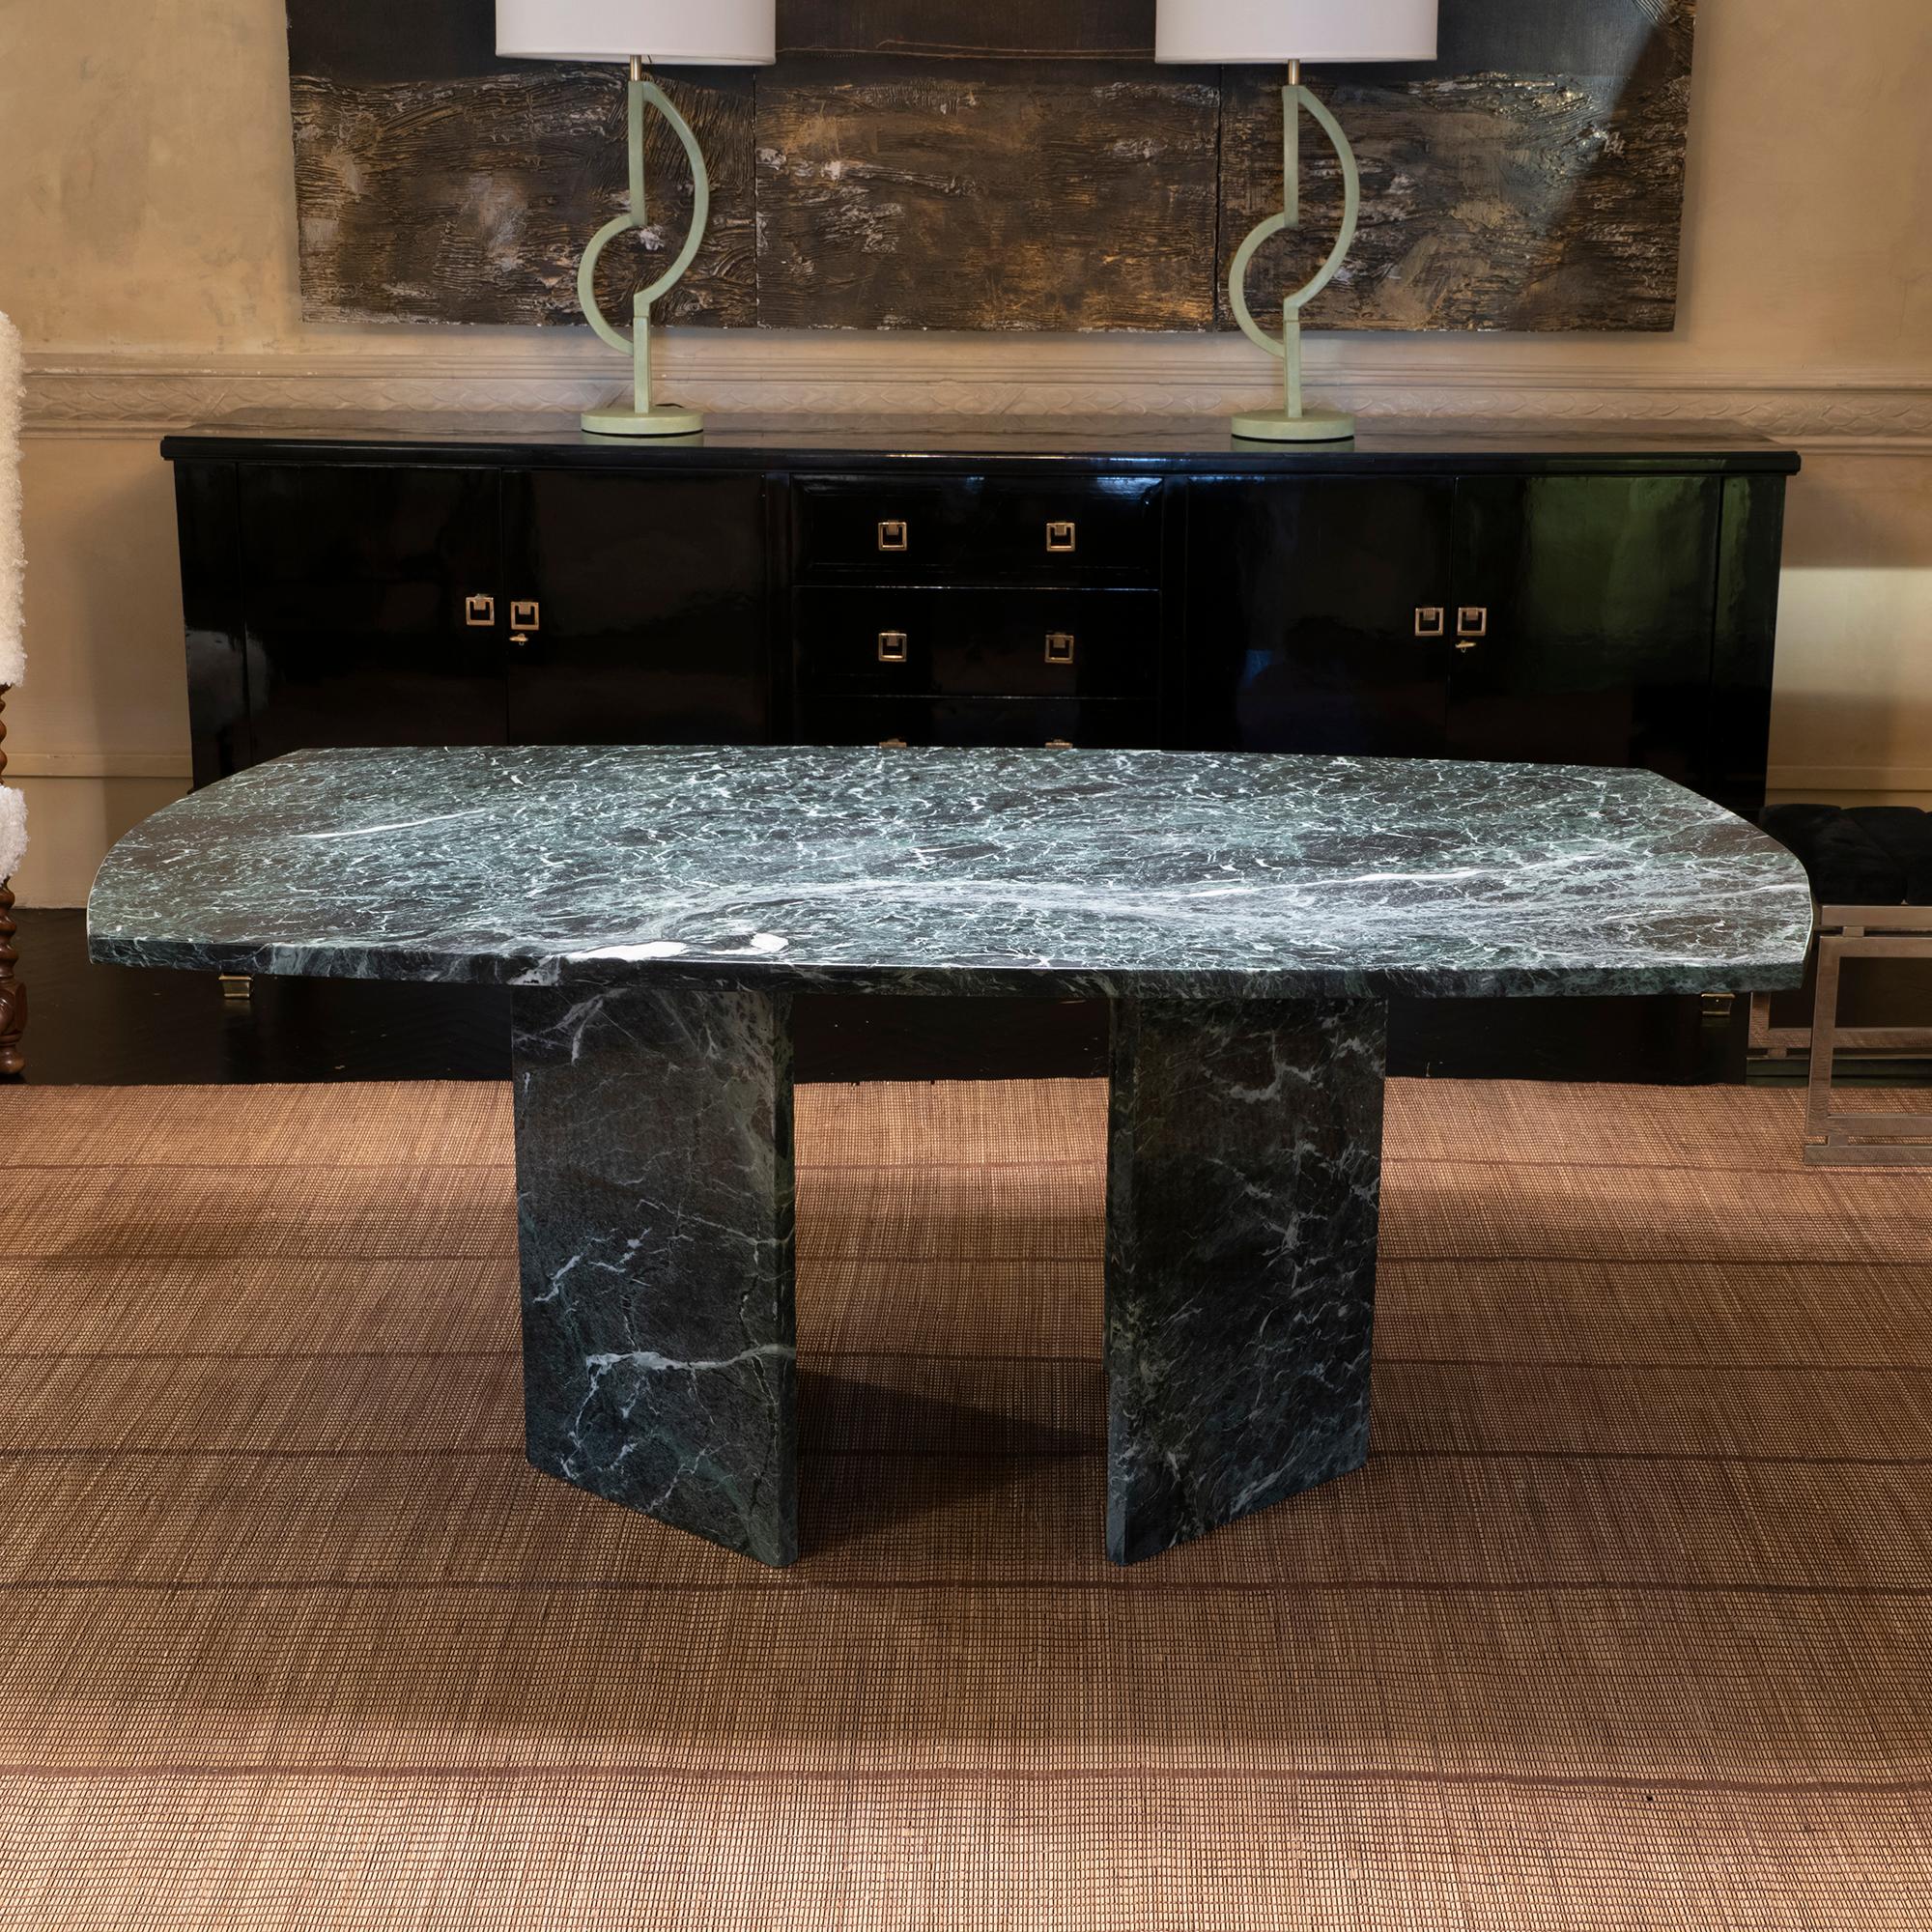 1970s Italian center / Dining table in Verde Alpi marble, top and two detached triangular bases, perfect condition and vintage patina on the surface.